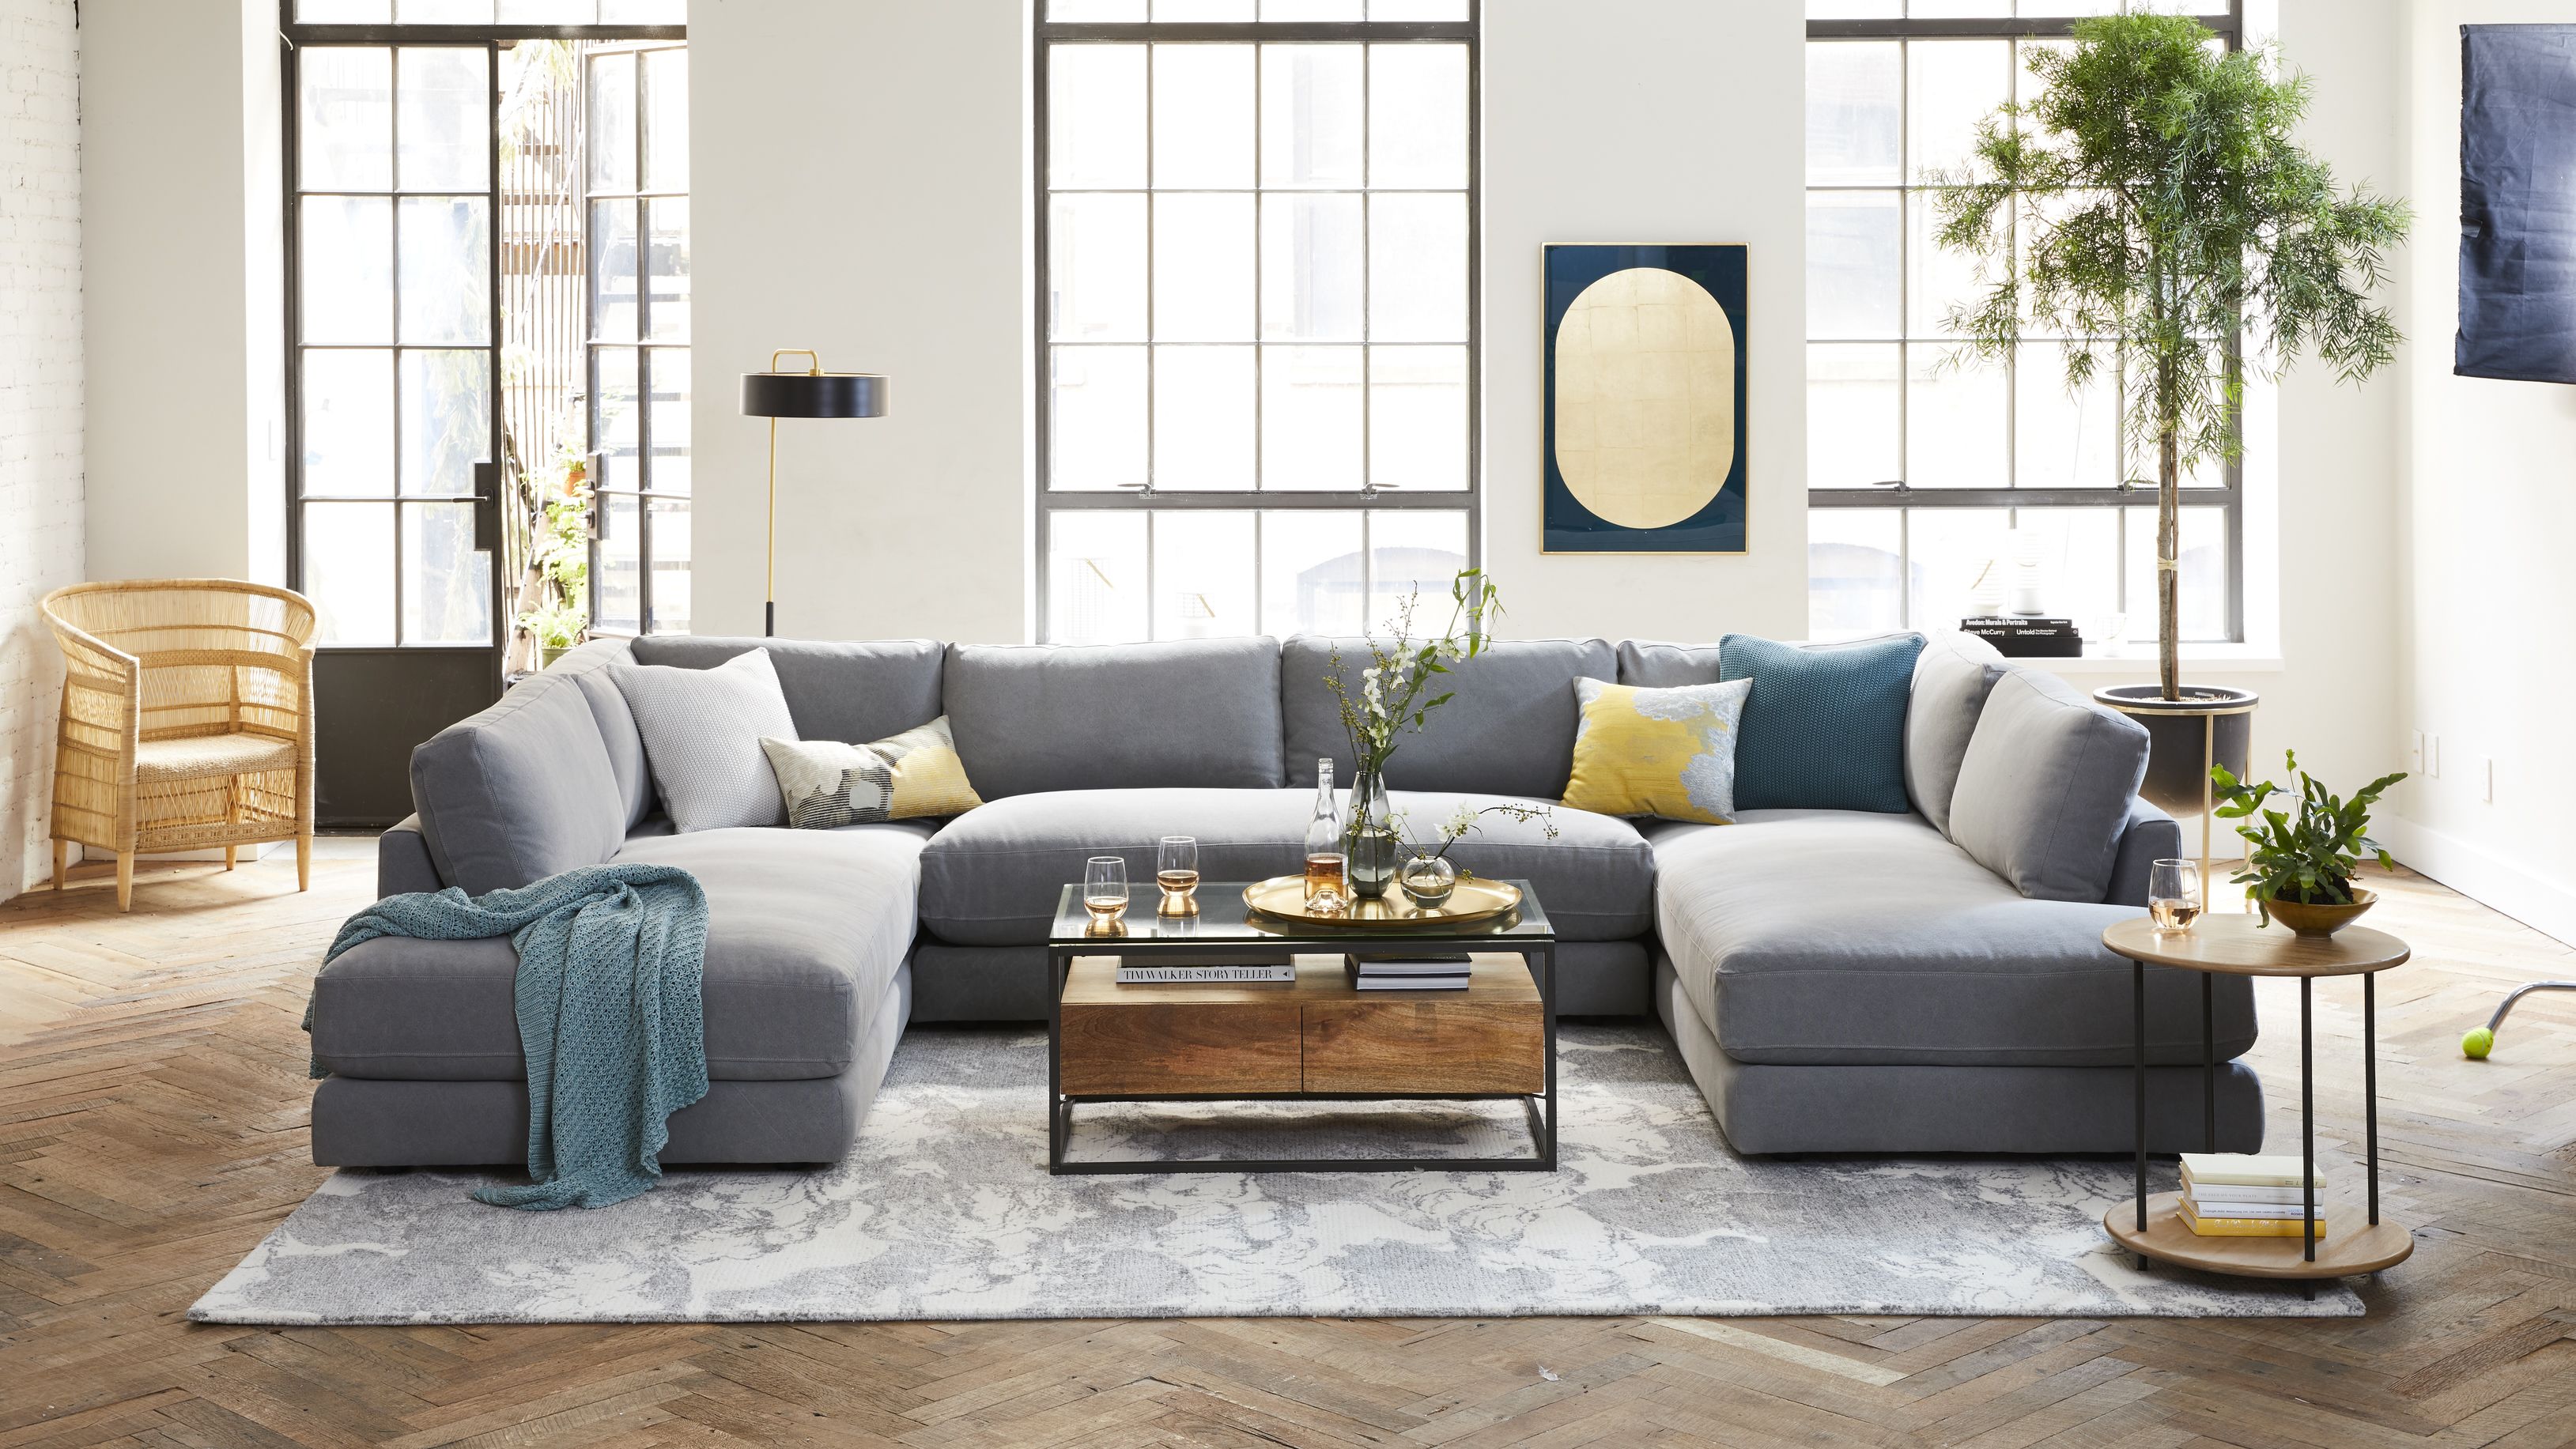 West Elm is partnering with Rent the Runway to rent out home decor